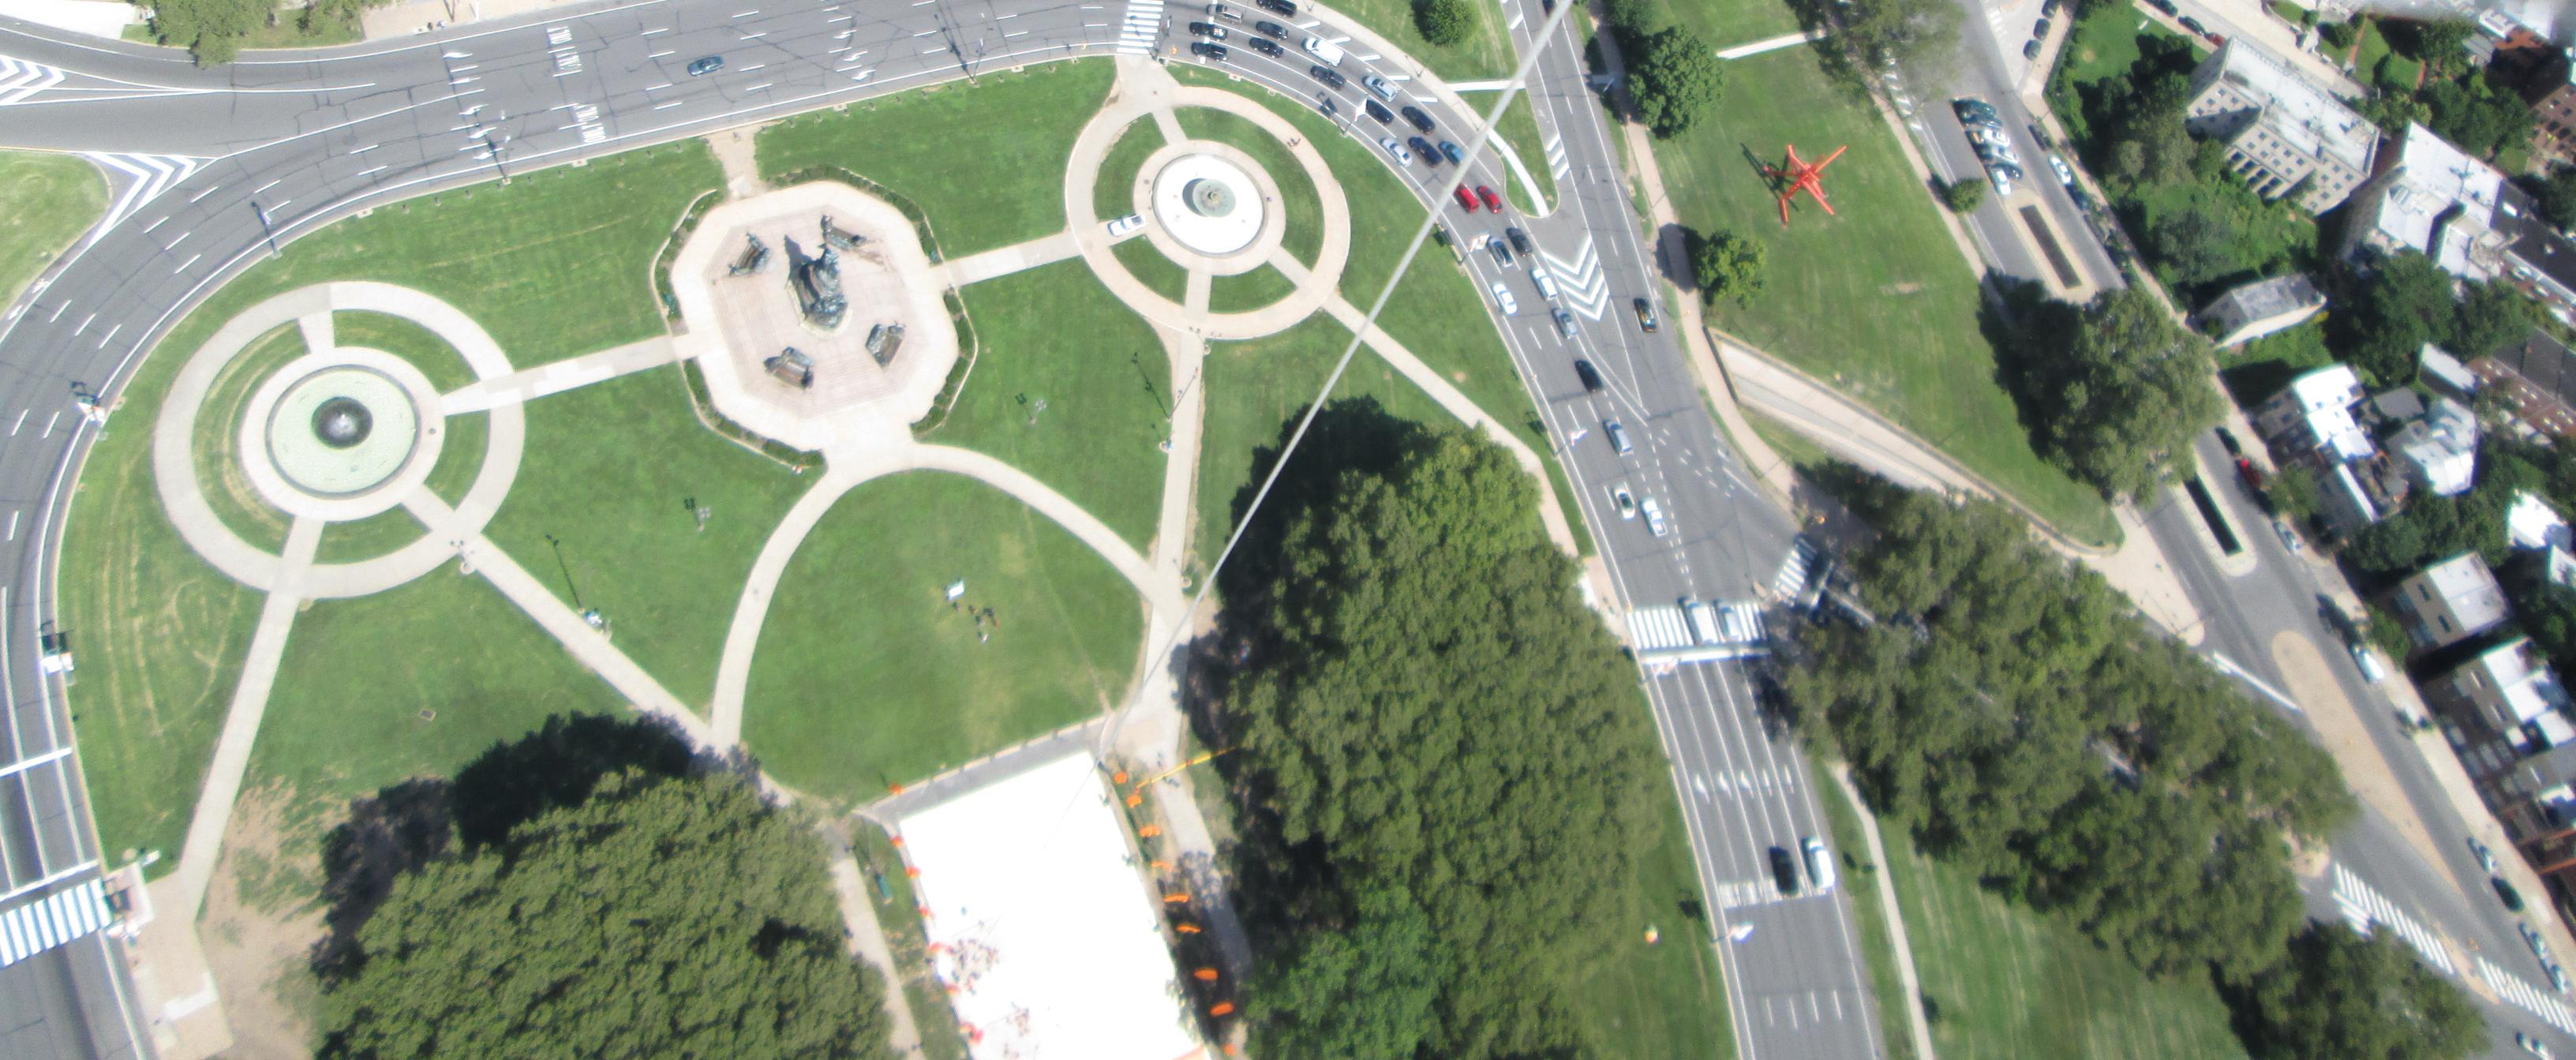 One among the thousands of images captured during the balloon mapping exercise at Eakins Oval. | courtesy of Michelle Schmitt